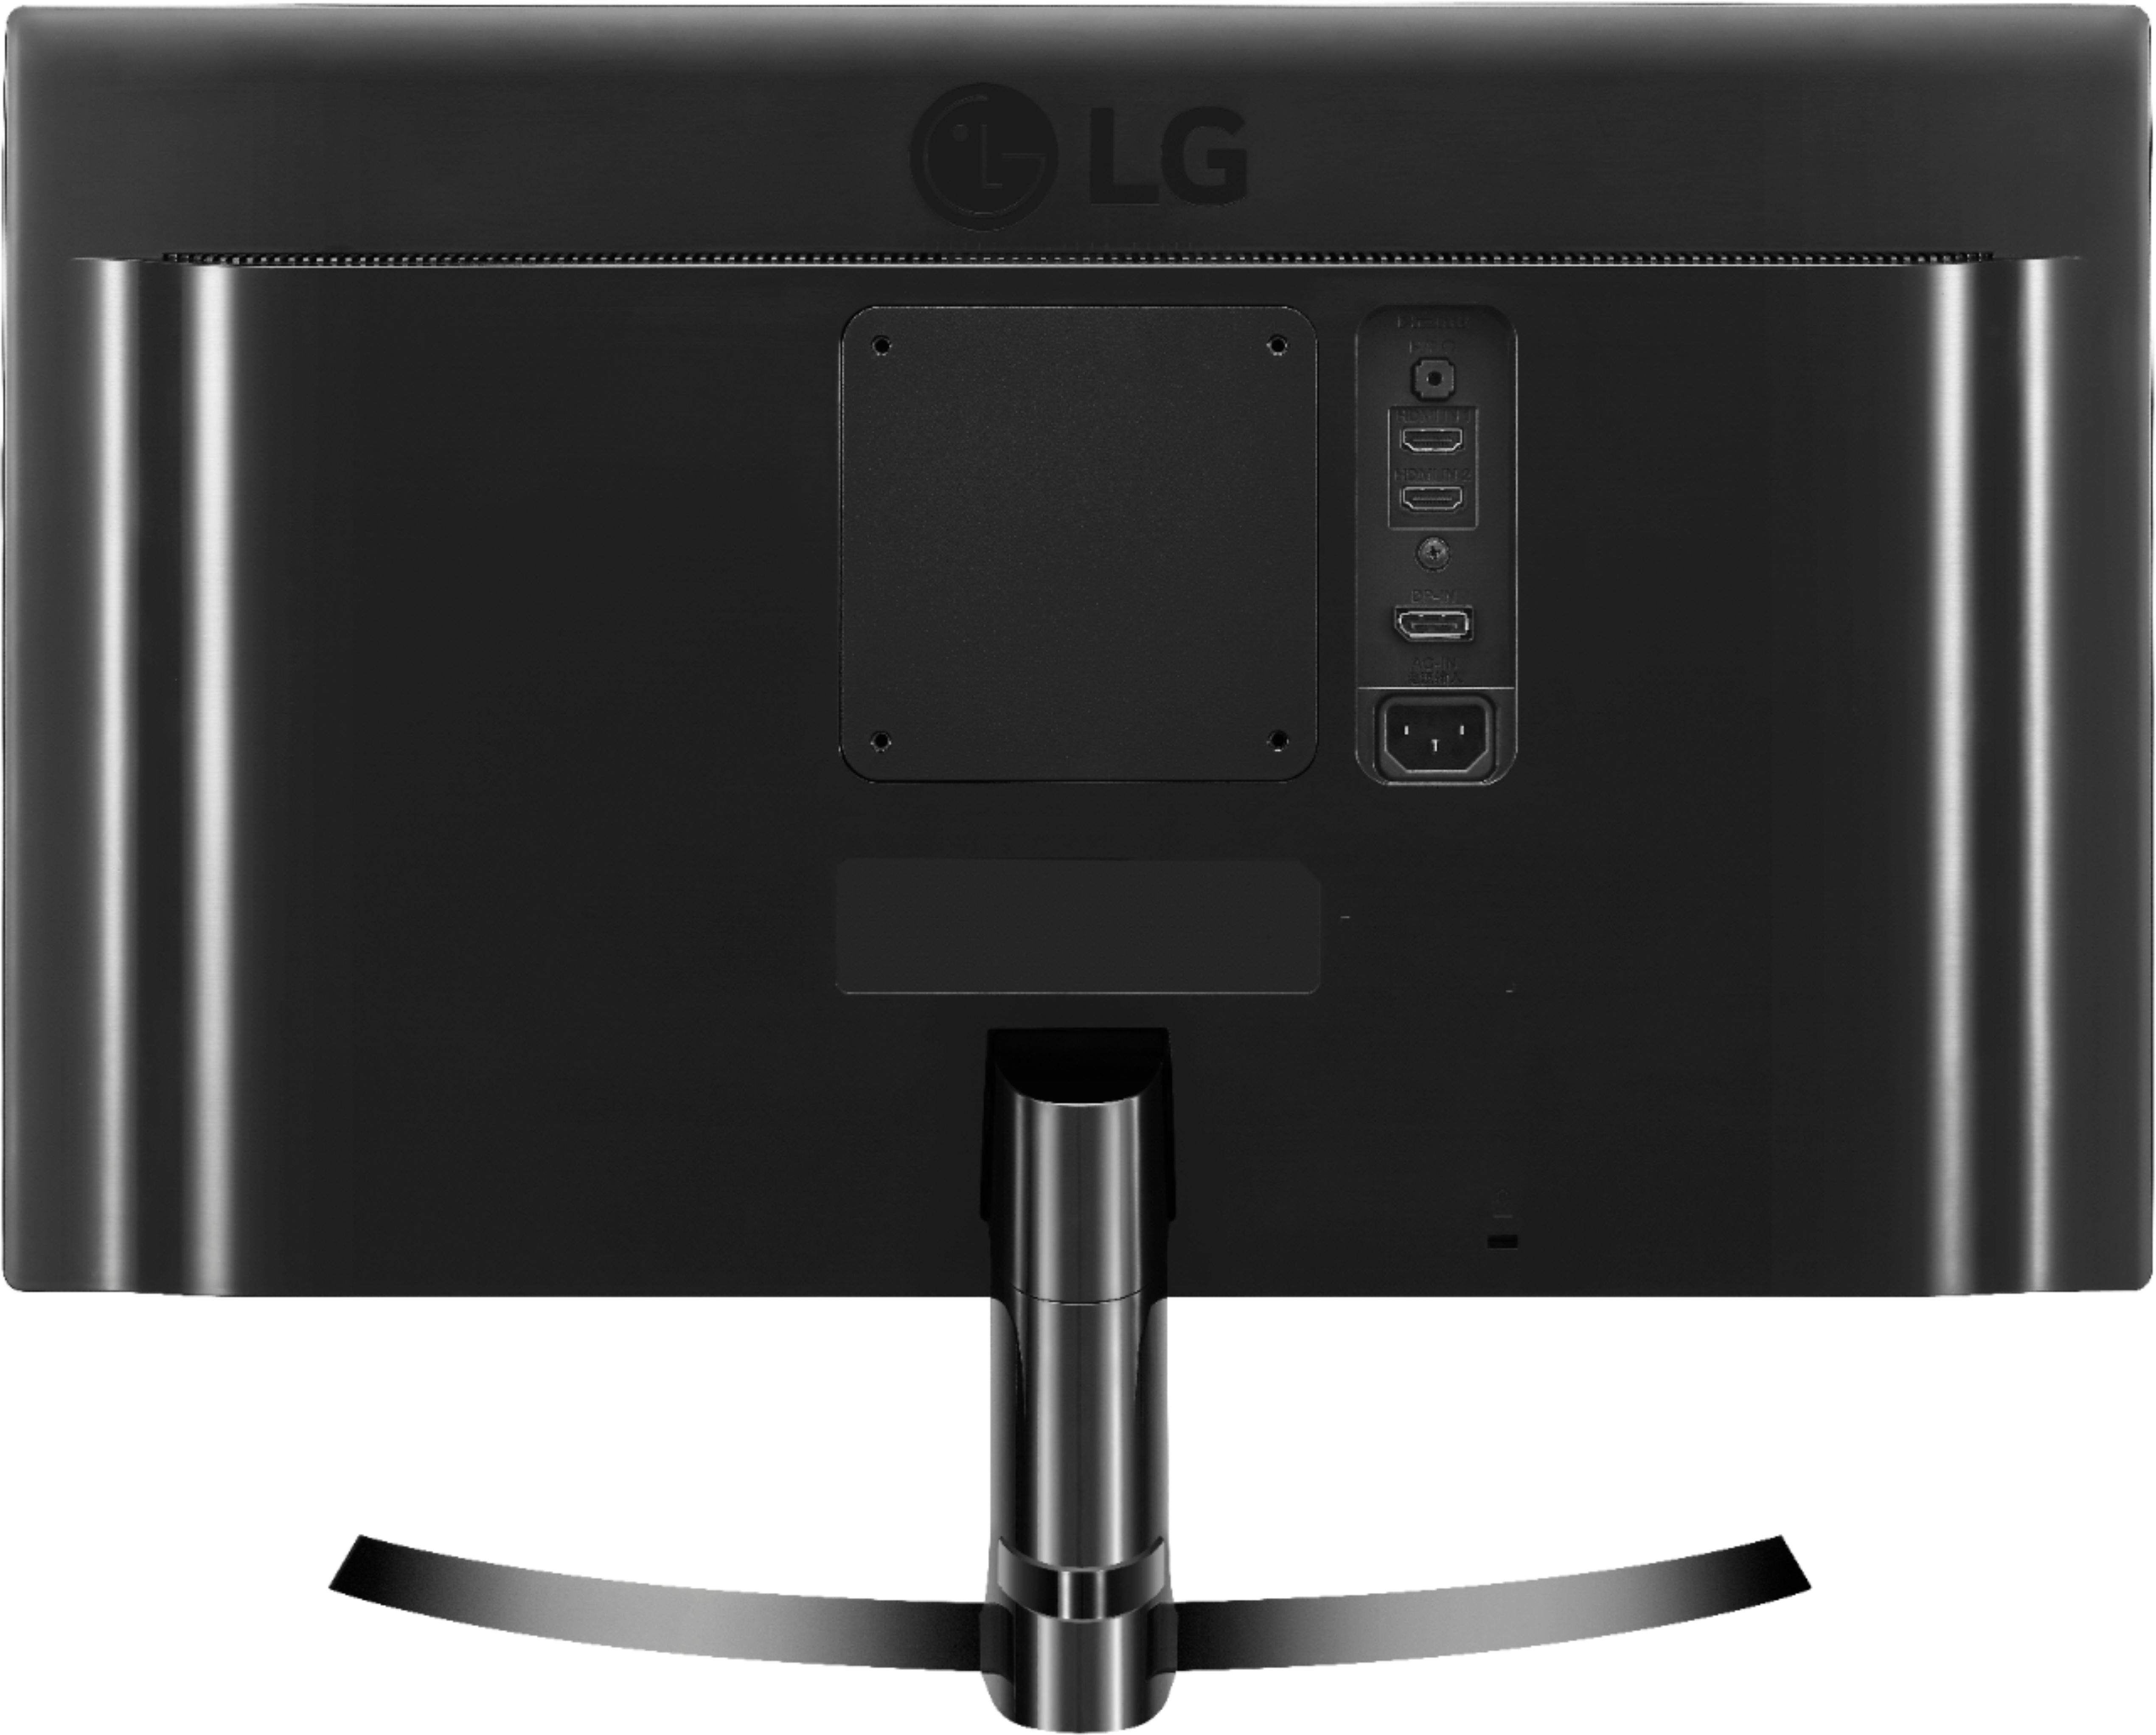 Back View: LG - 7.3 Cu. Ft. Smart Electric Dryer with Sensor Dry - Graphite Steel